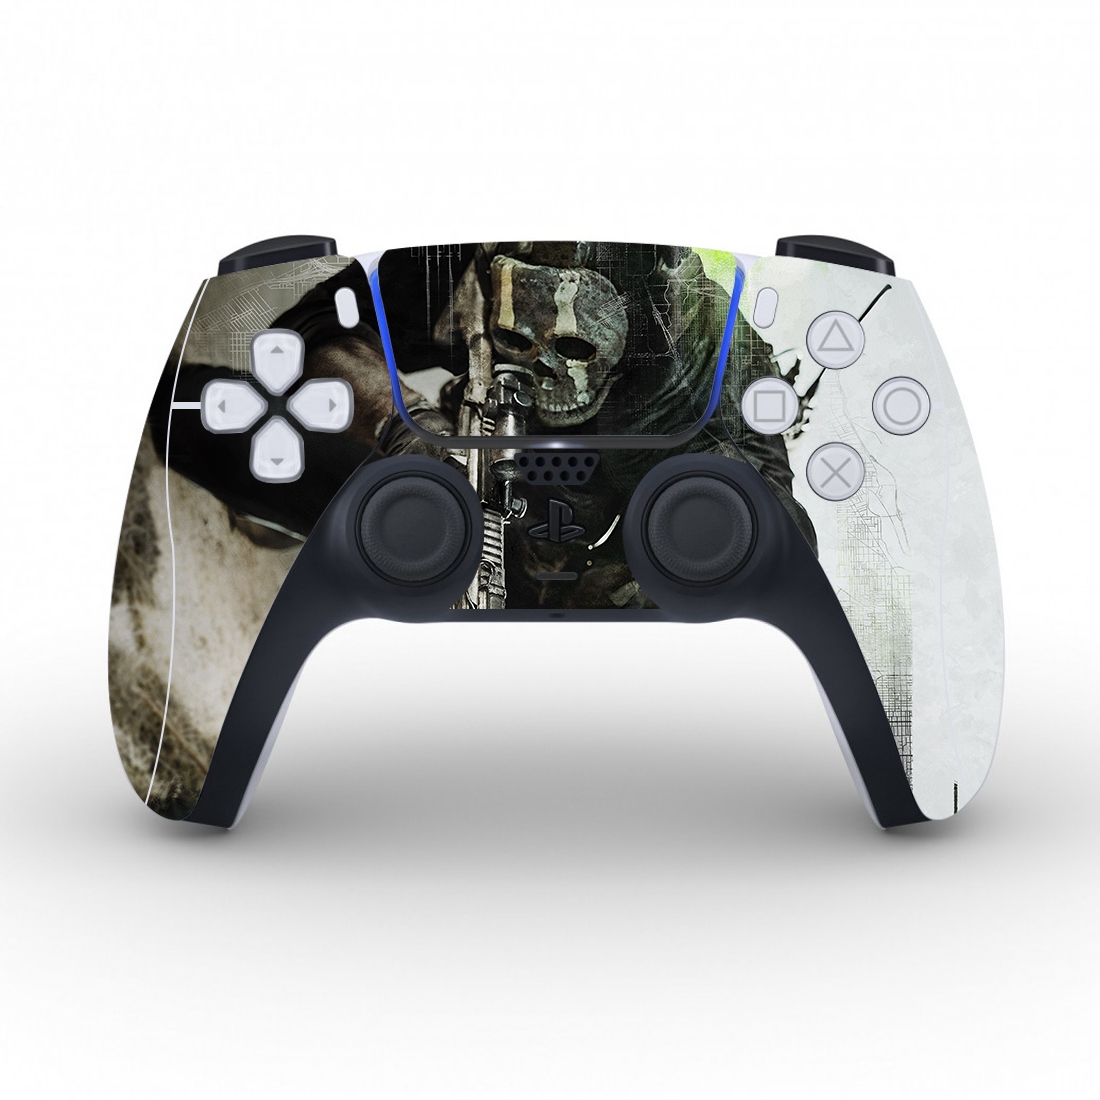 Call of Duty Protective Cover Sticker For PS5 Controller Gamepad Joystick Skin For Playstation 5 Decal PS5 Skin Sticker Vinyl